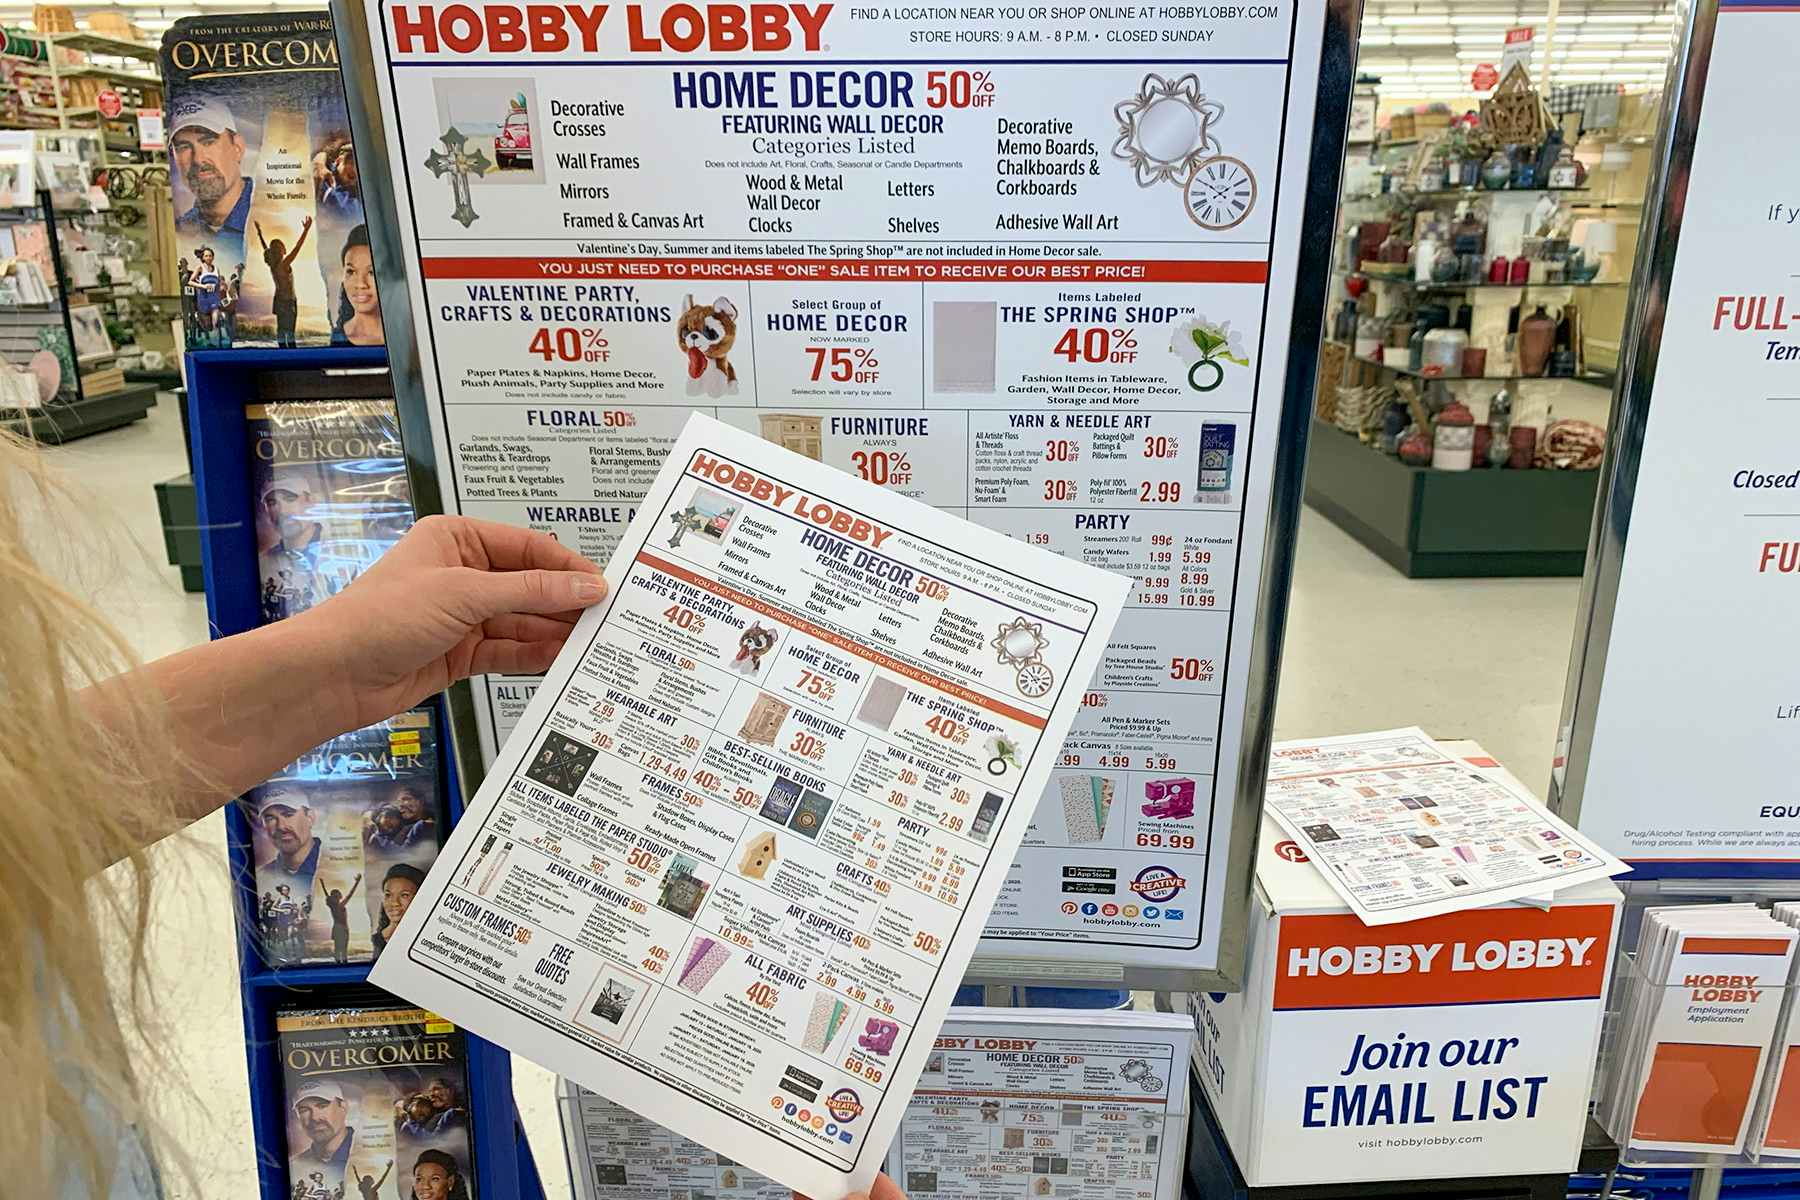 A woman looking at the sales schedule flyer.